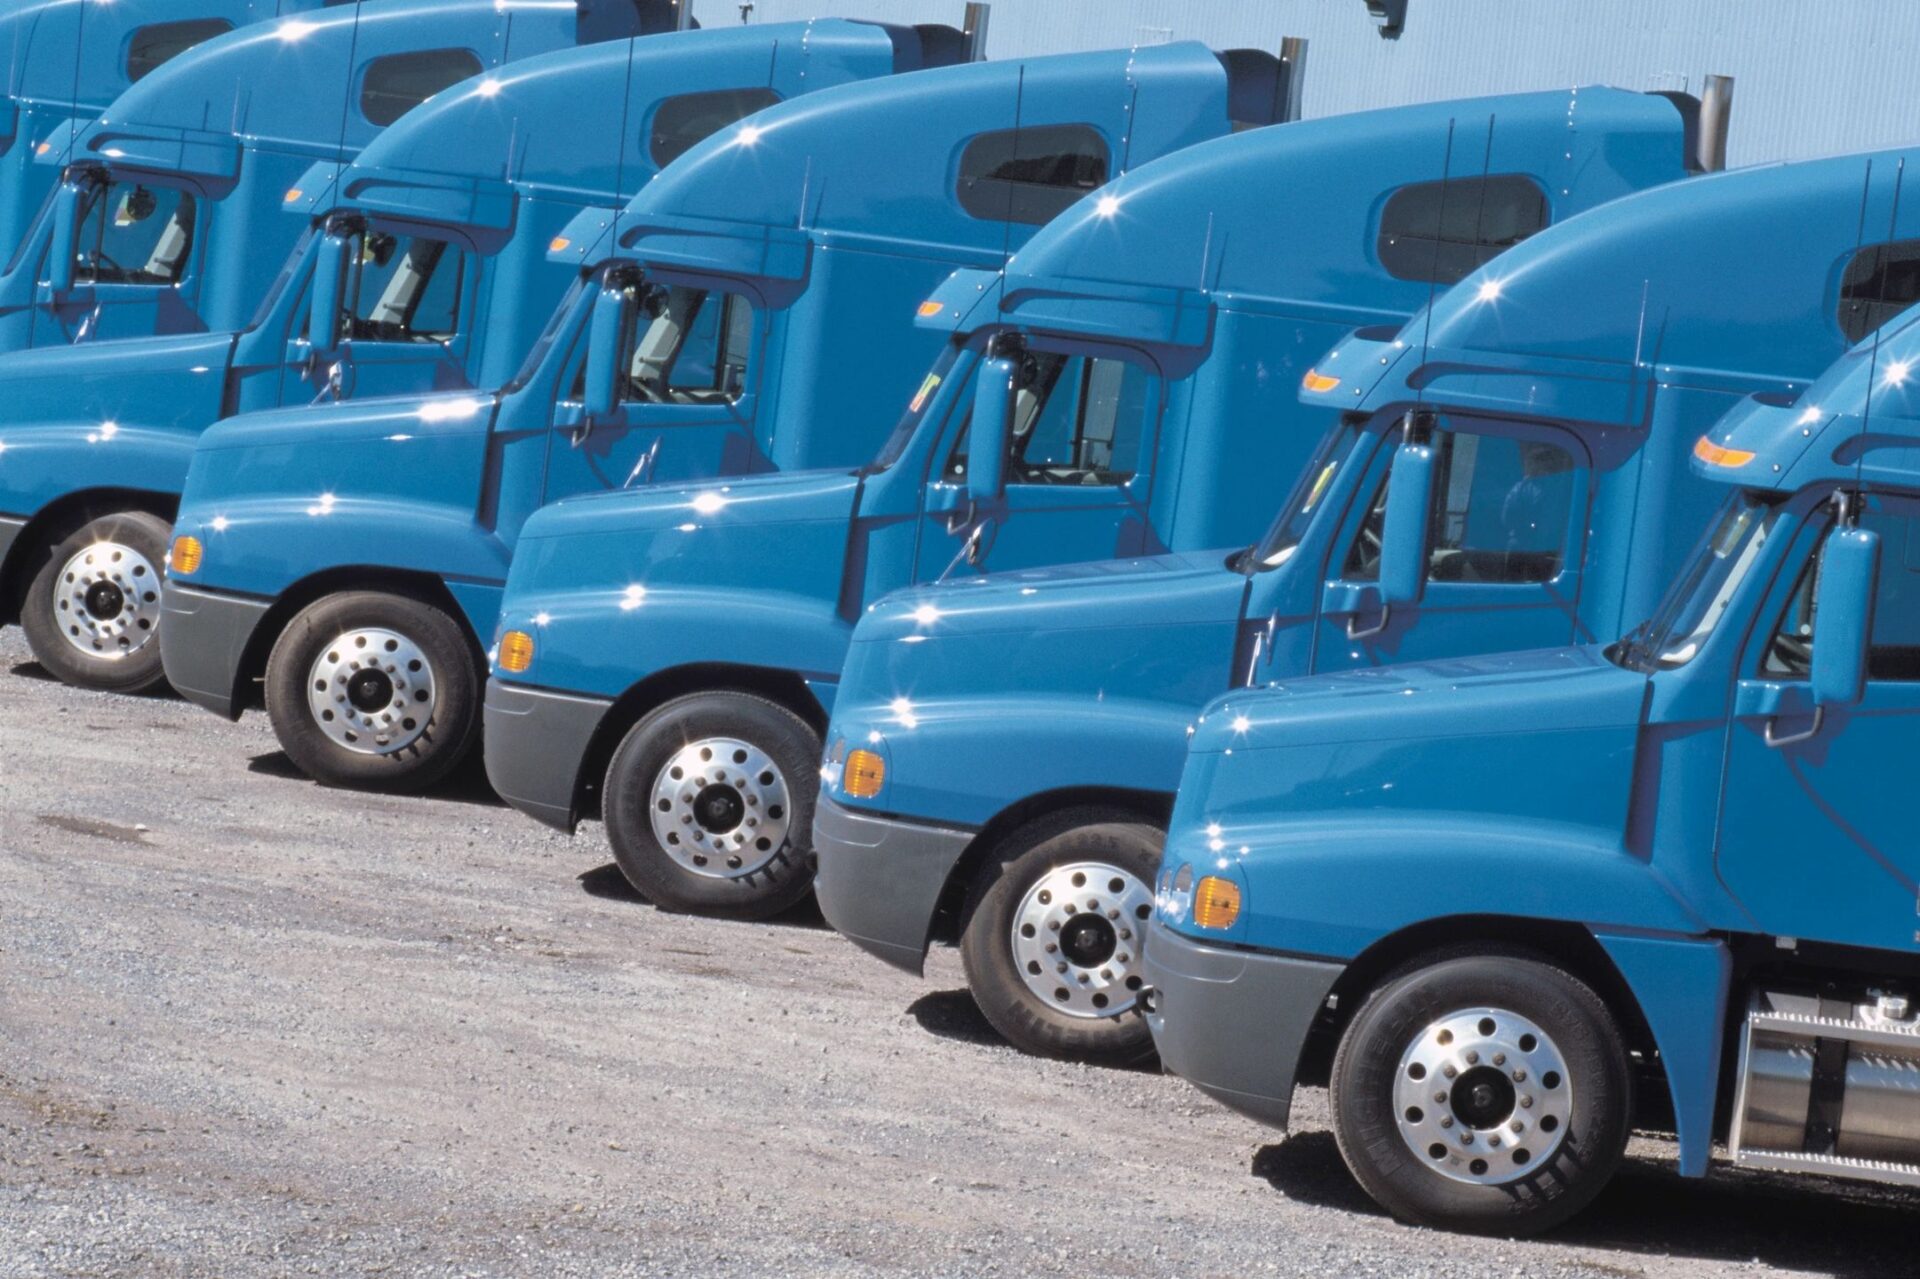 A row of blue semi trucks parked in a lot.